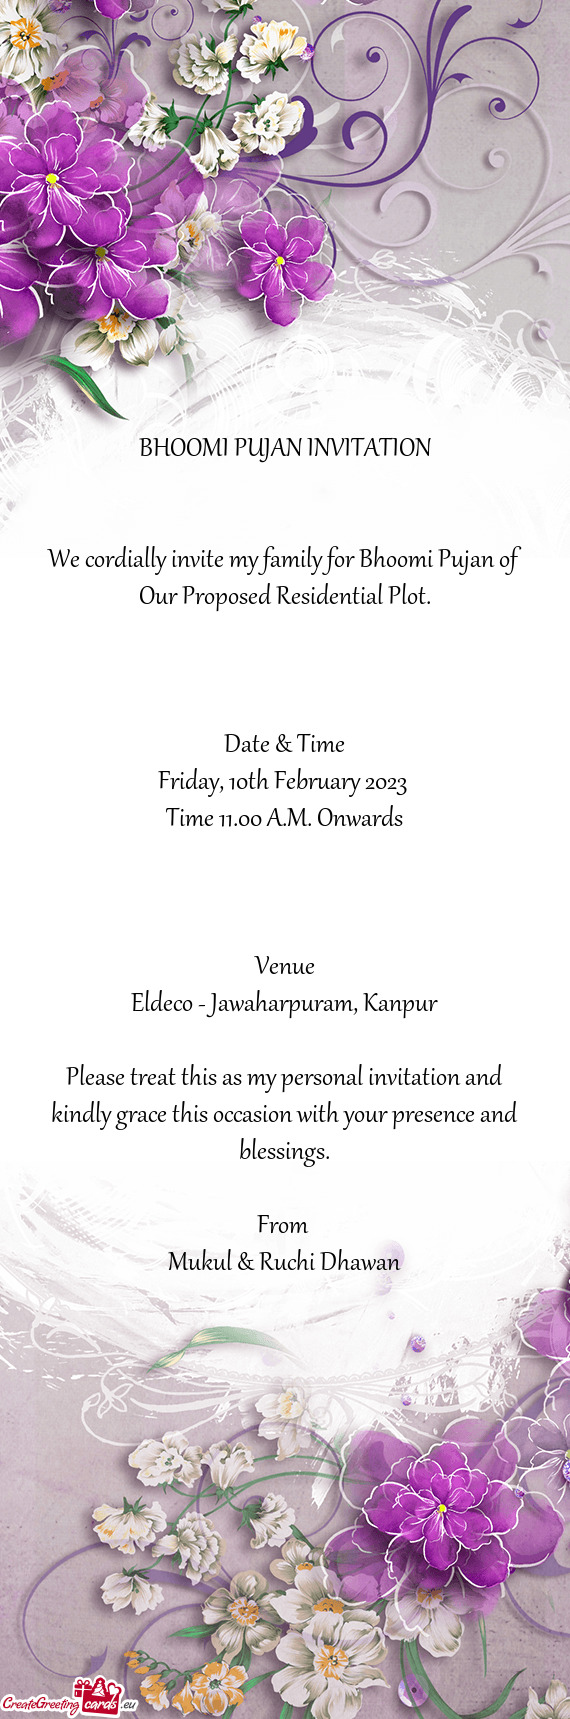 We cordially invite my family for Bhoomi Pujan of Our Proposed Residential Plot